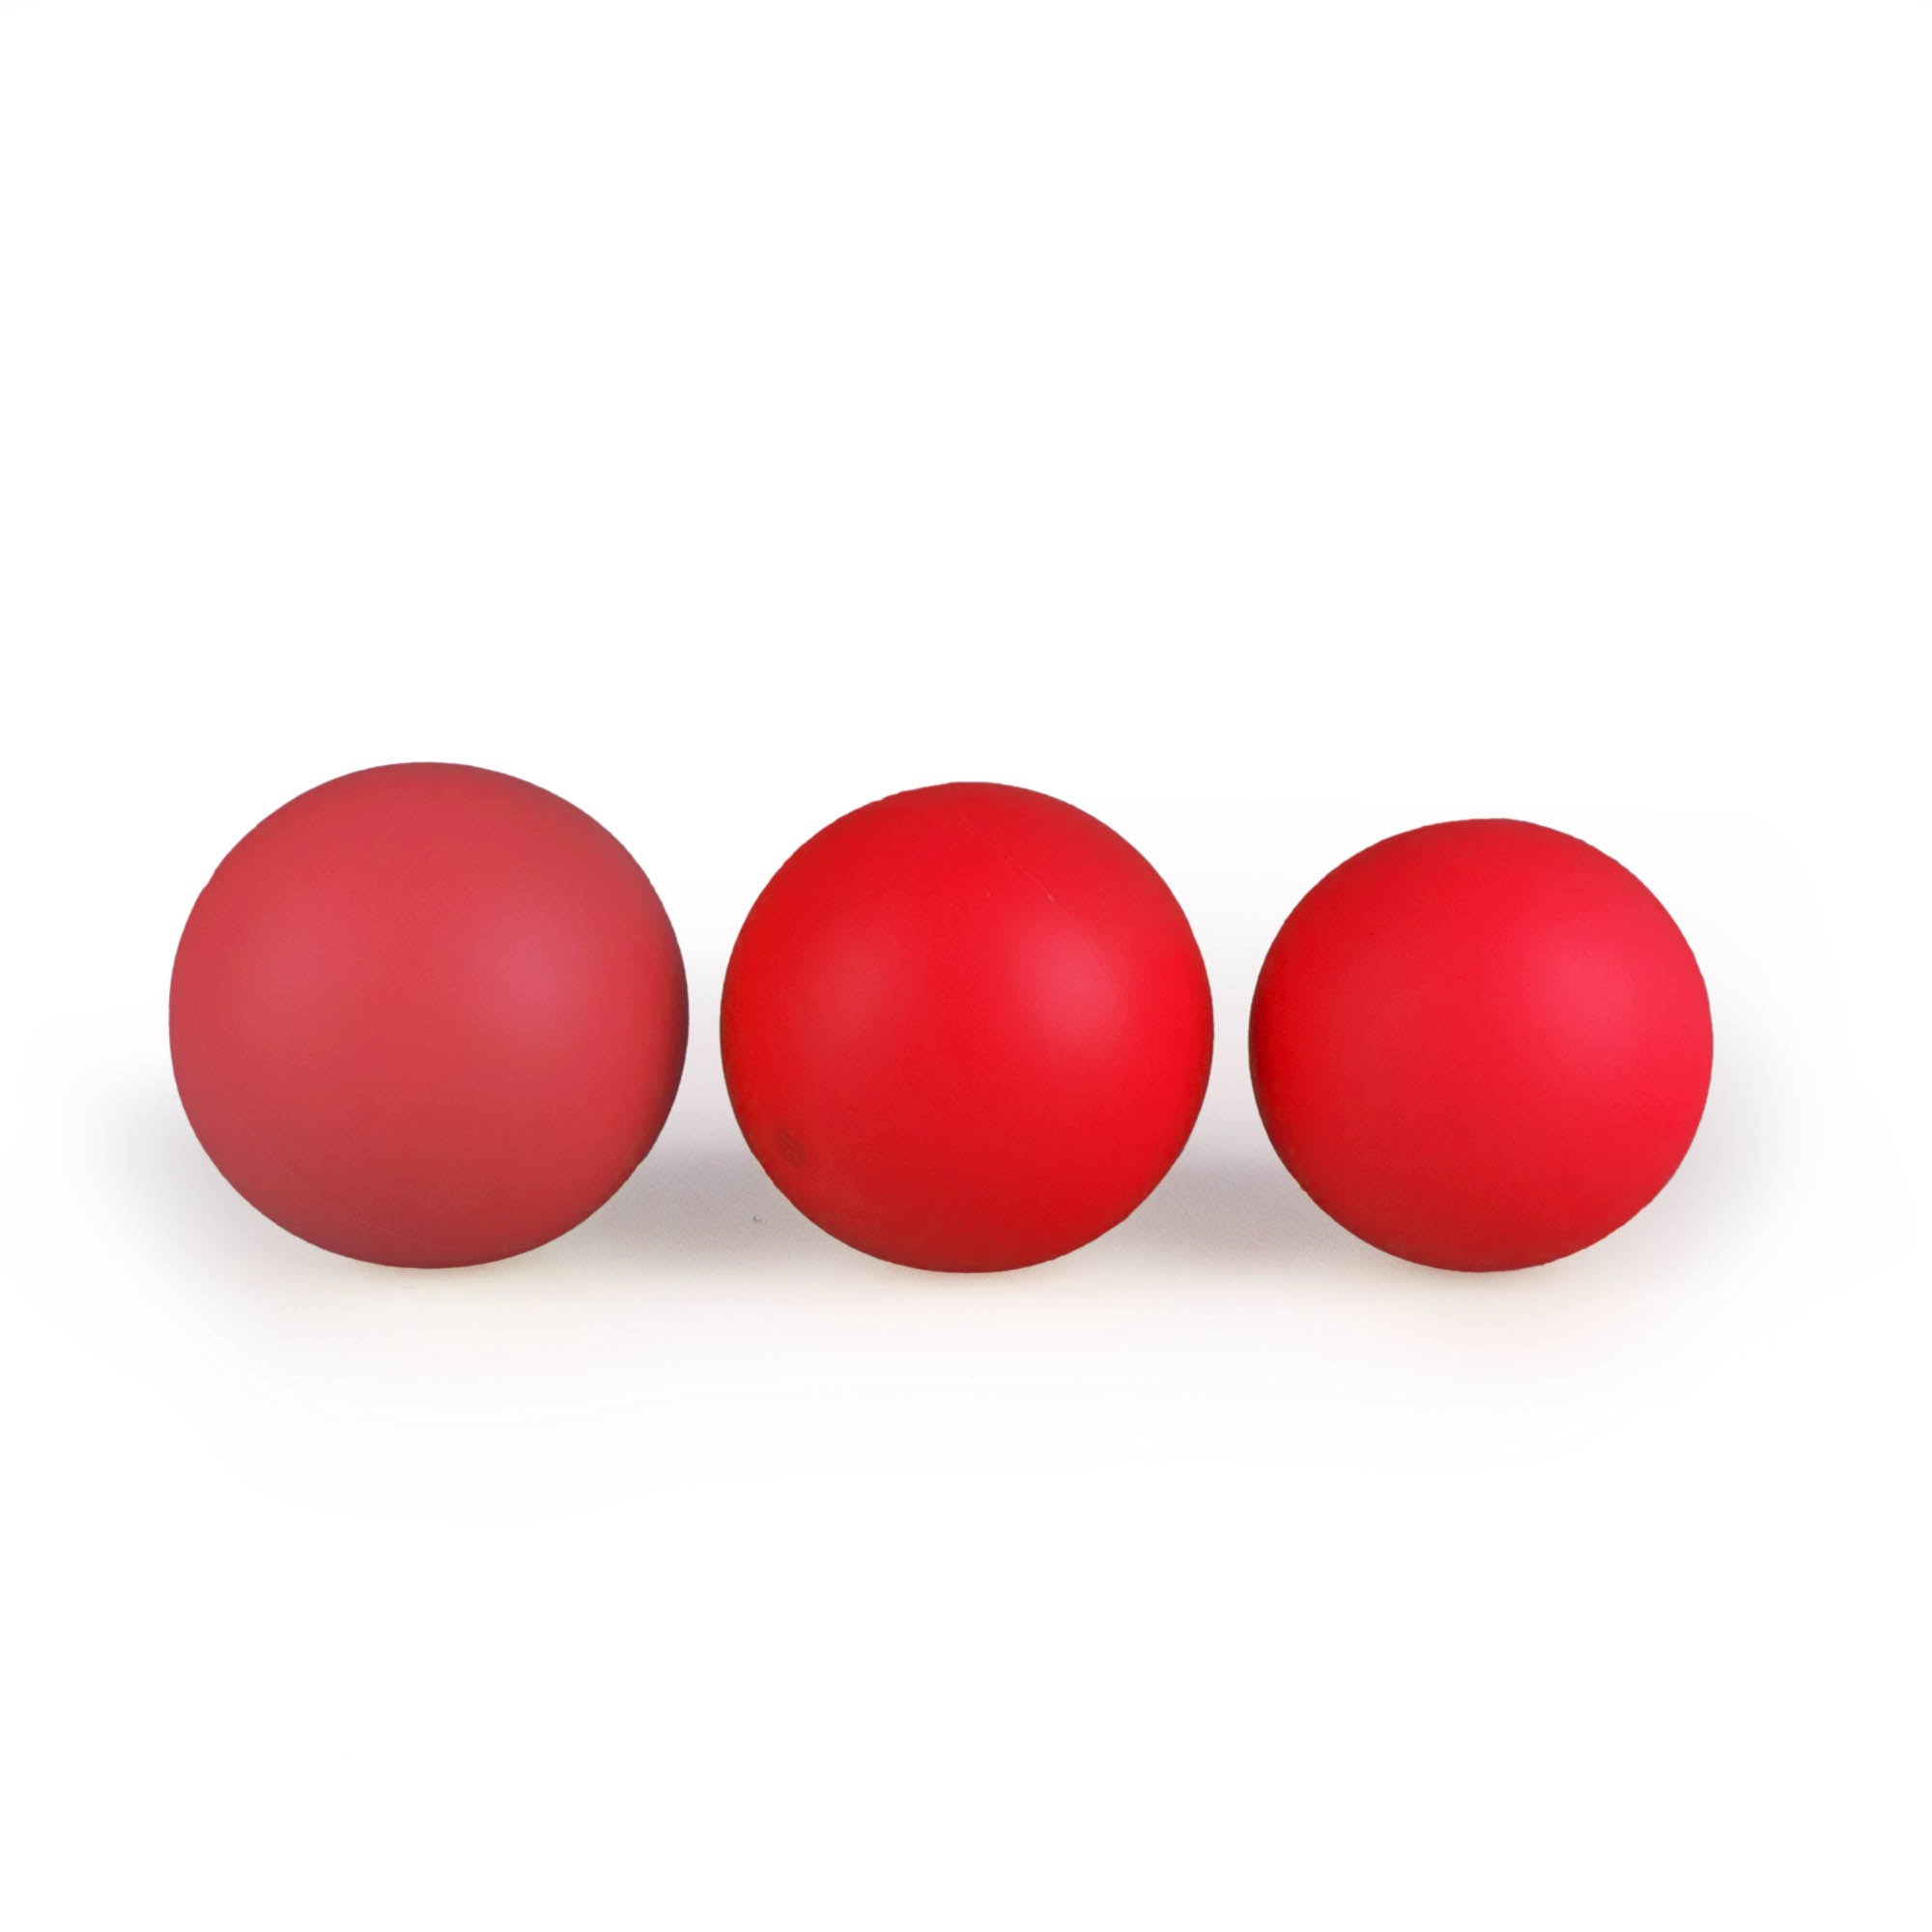 MMX juggling ball comparison shot in red